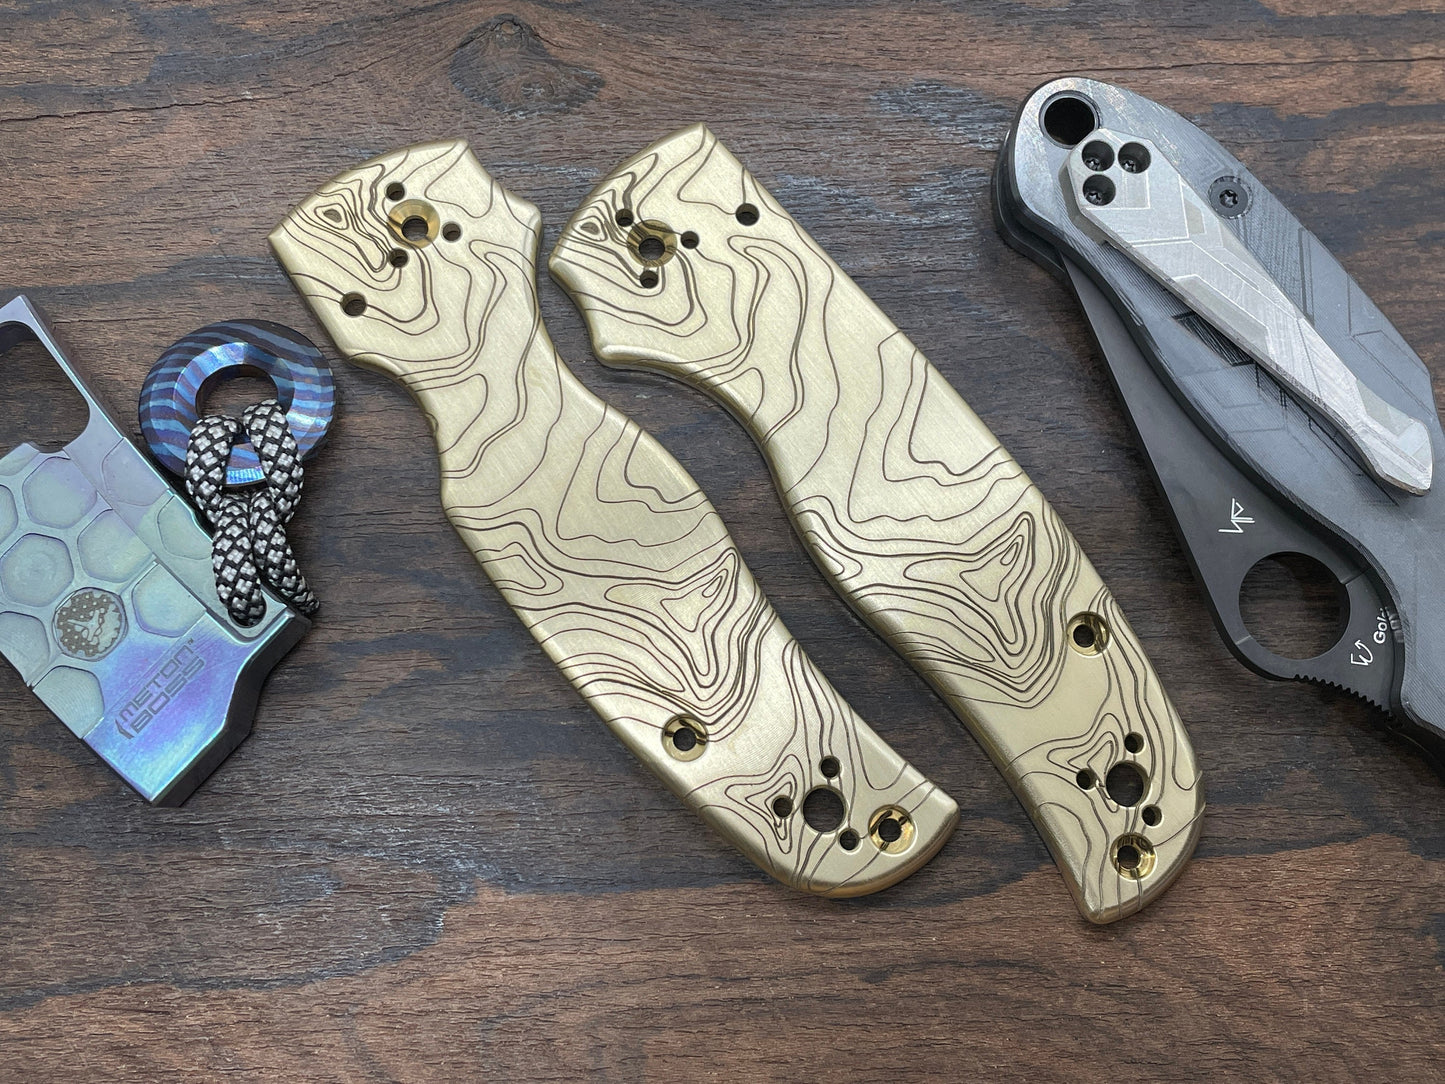 TOPO engraved Brass Scales for SHAMAN Spyderco